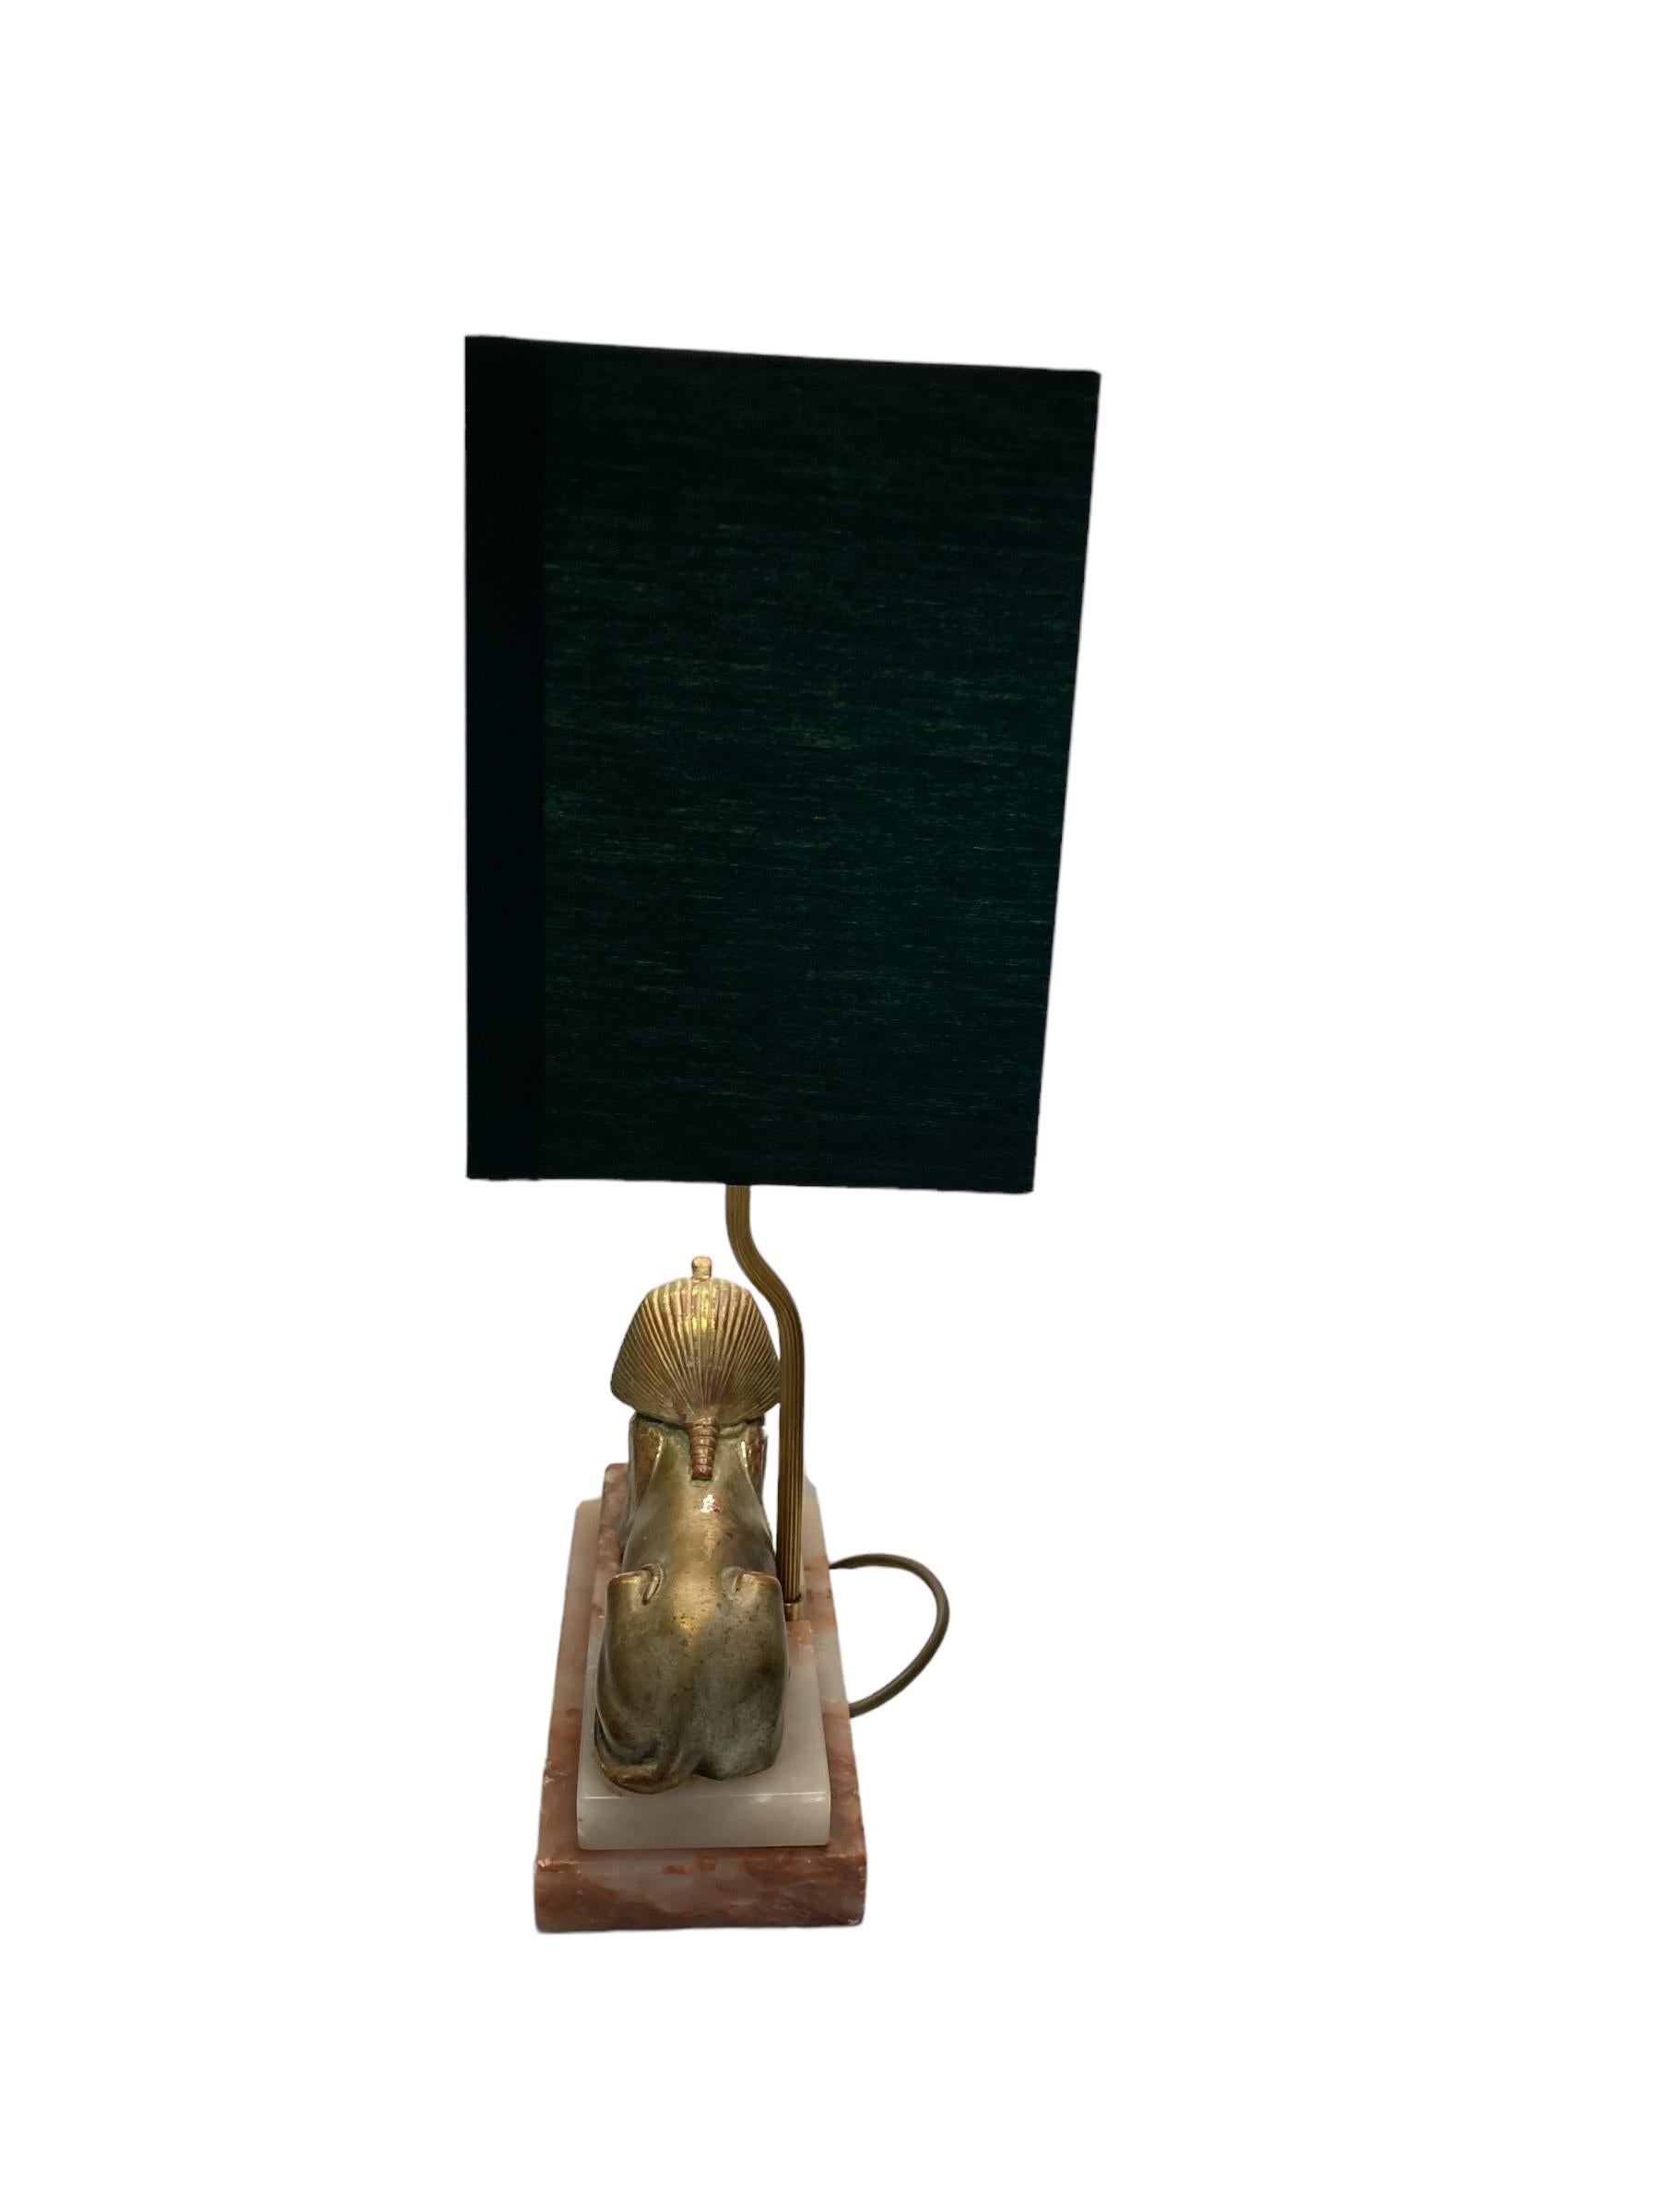 A Pair of Art Deco Egytian Sphinx Table Lamps on a Marble Base Dark Green Shades For Sale 1